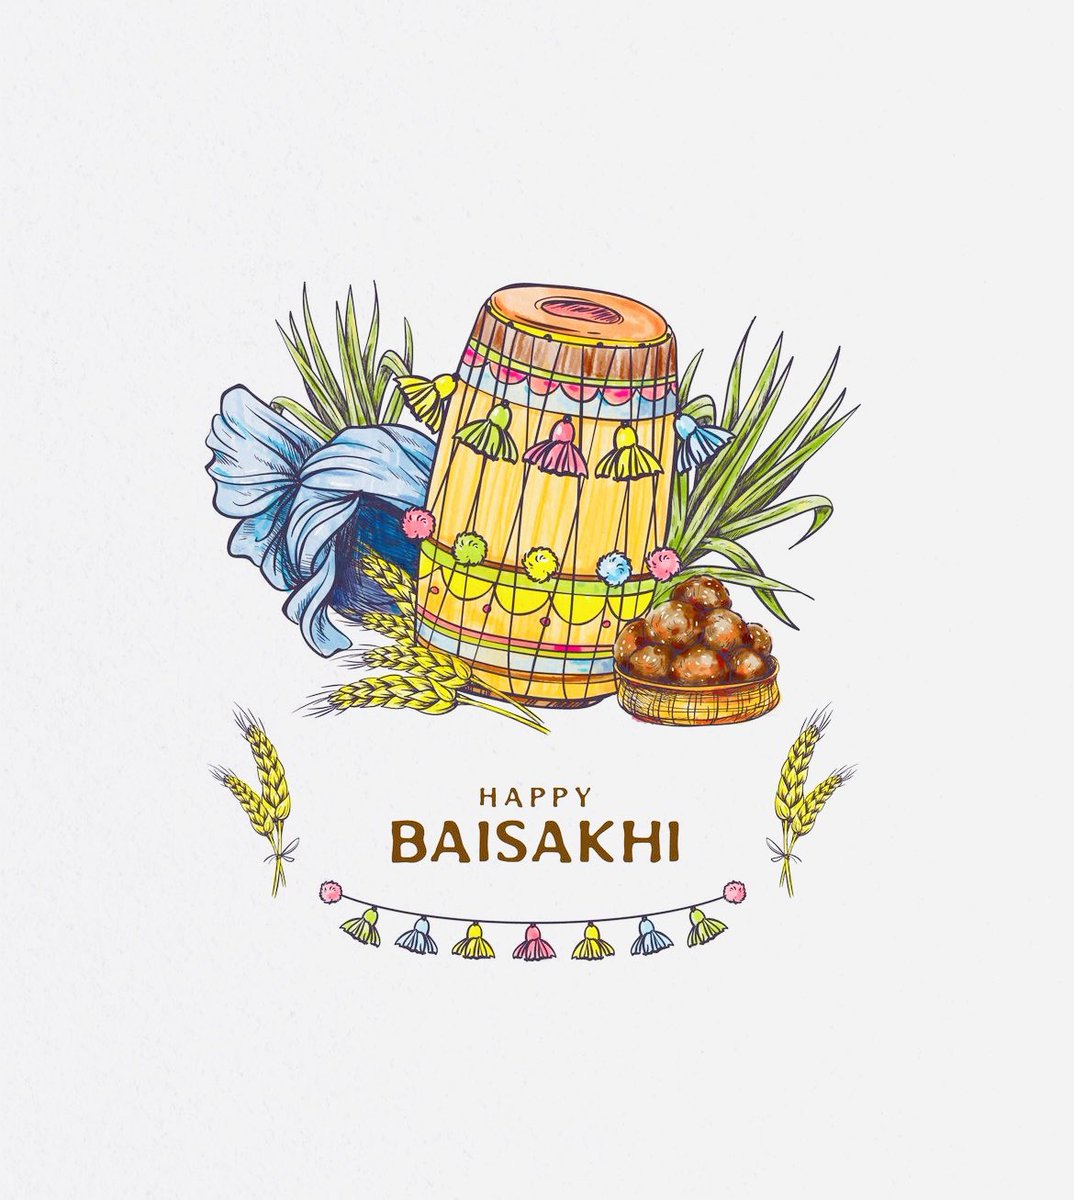 May the festival of Baisakhi bring happiness and abundance to all. 🌾